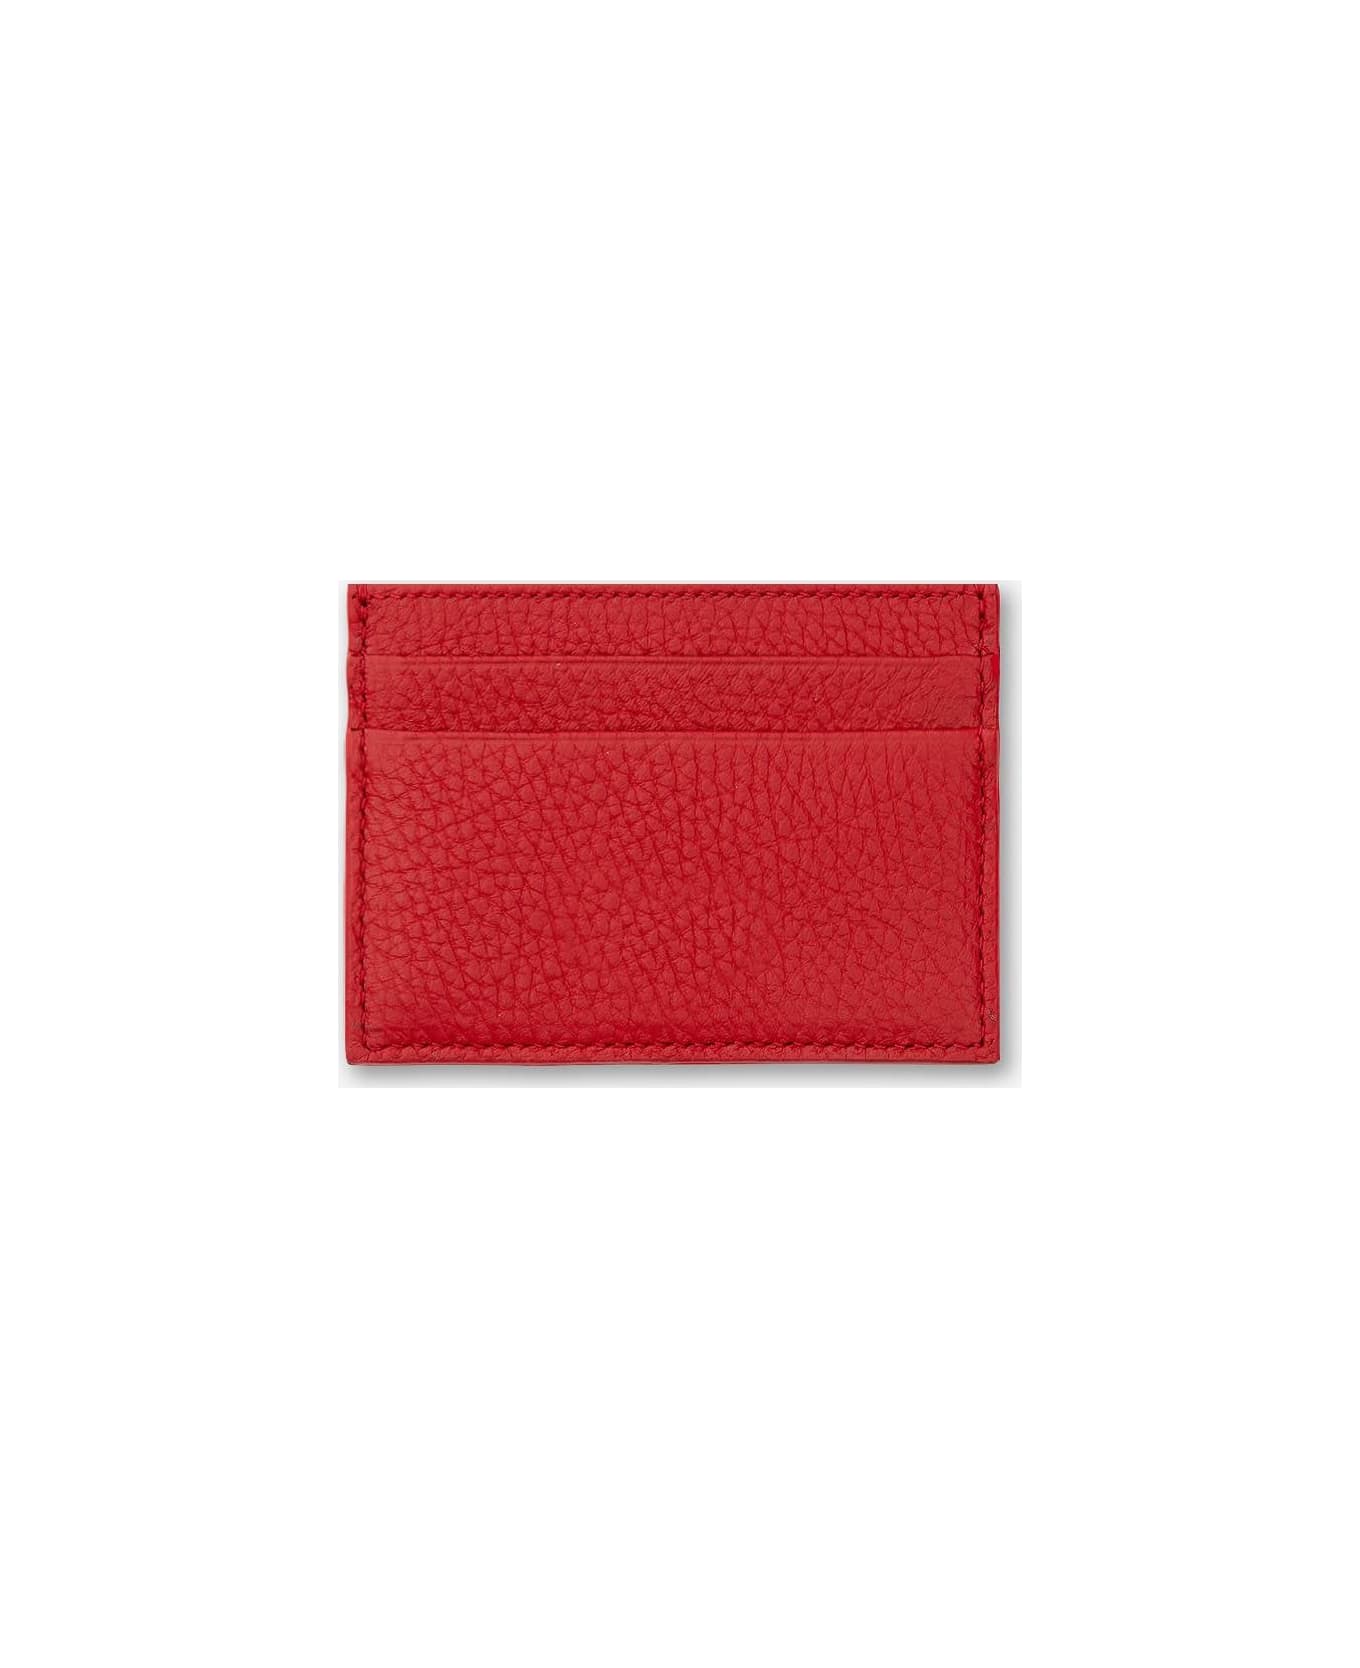 Larusmiani Card Holder 'yield' Wallet - Red 財布